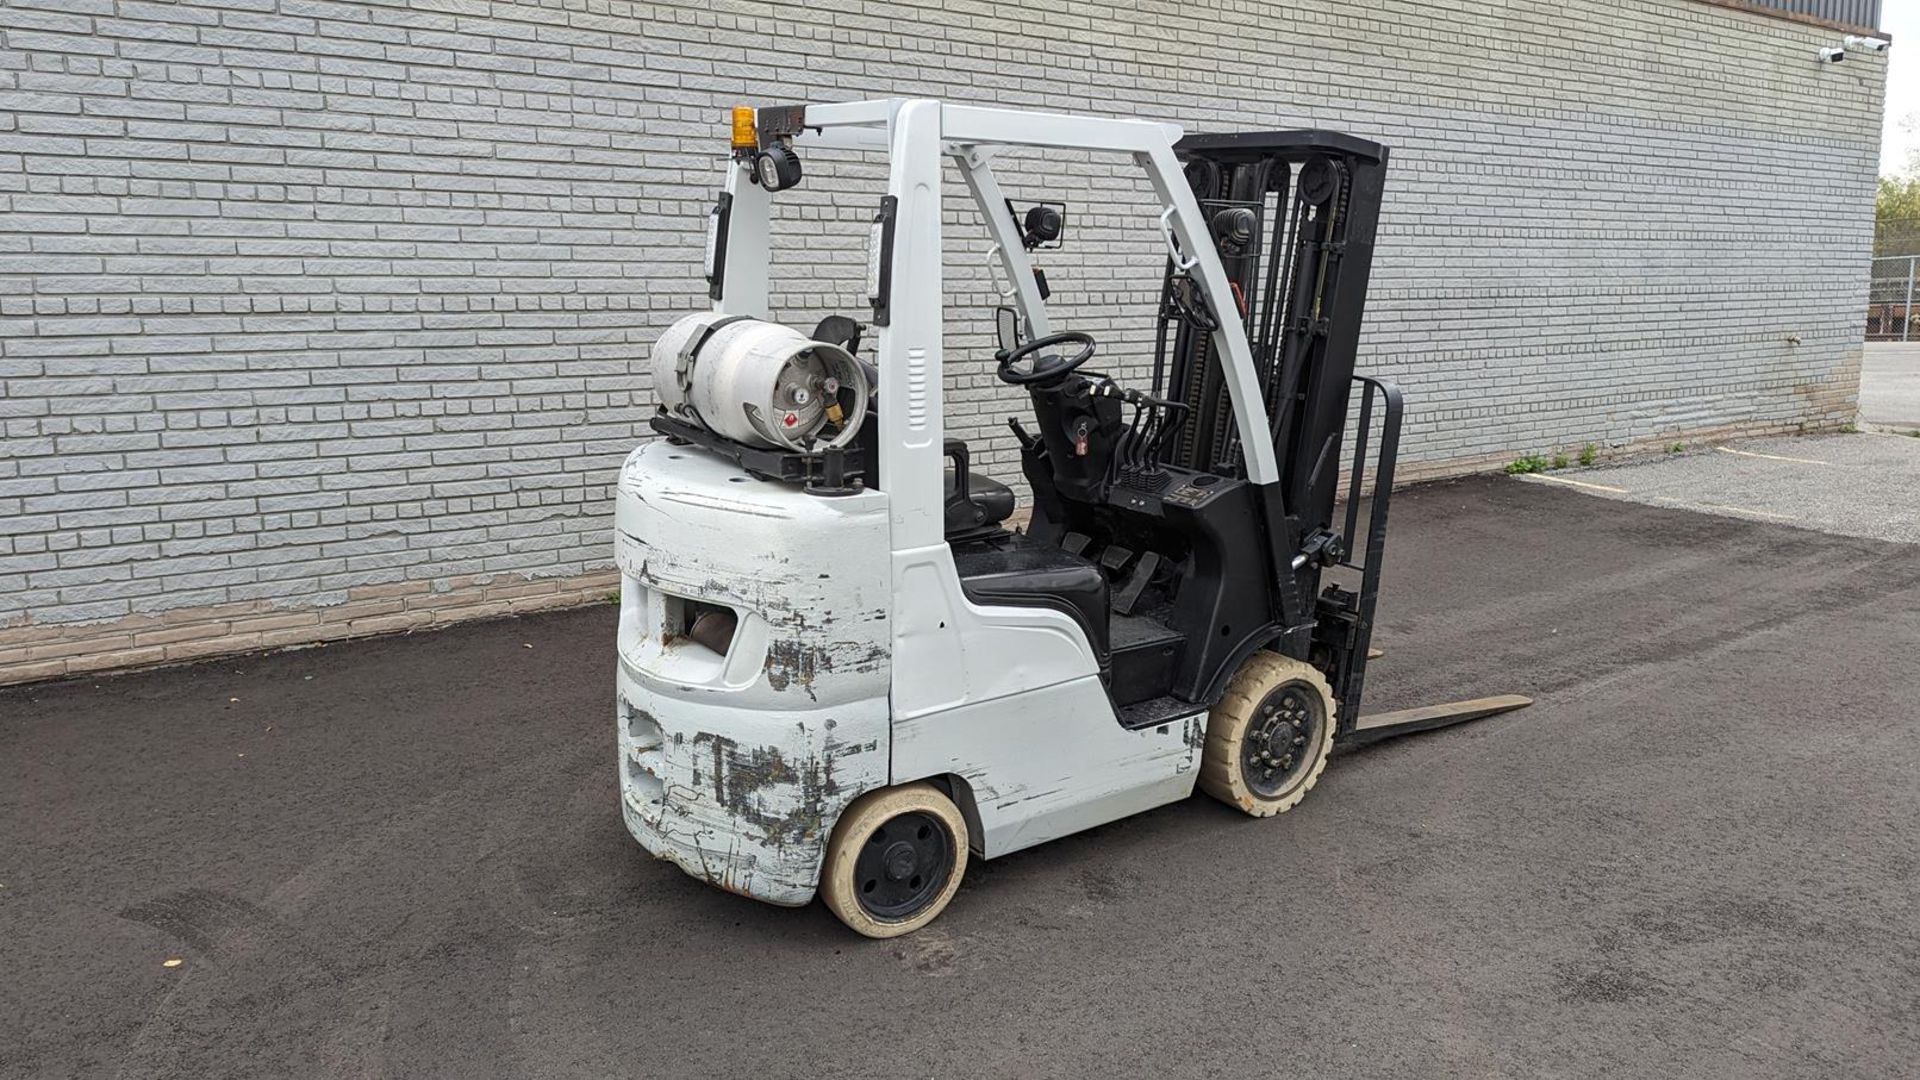 2018, UNICARRIERS, MCP1F2A25LV, 4,400 LBS., 3 STAGE, LPG FORKLIFT, SIDESHIFT - Image 5 of 17